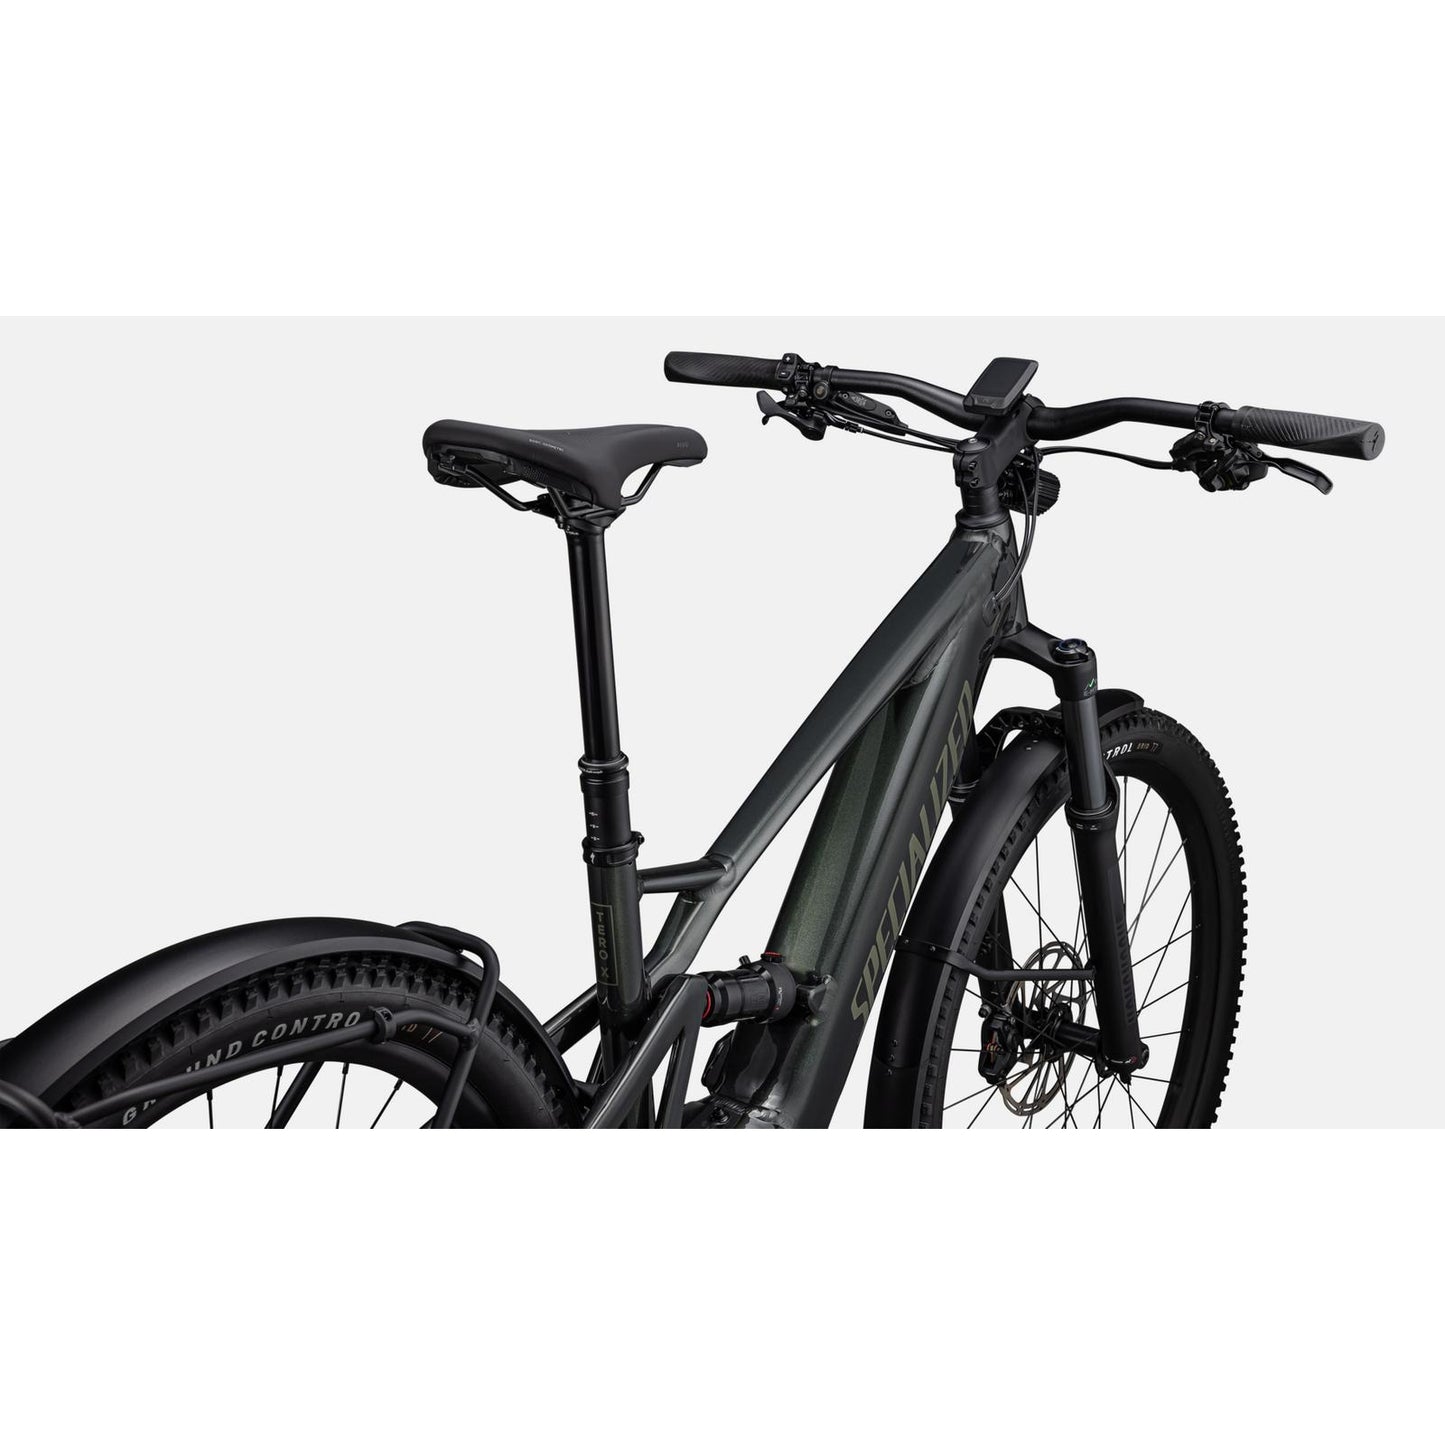 Specialized Turbo Tero X 5.0 Active Electric Bike - Bikes - Bicycle Warehouse